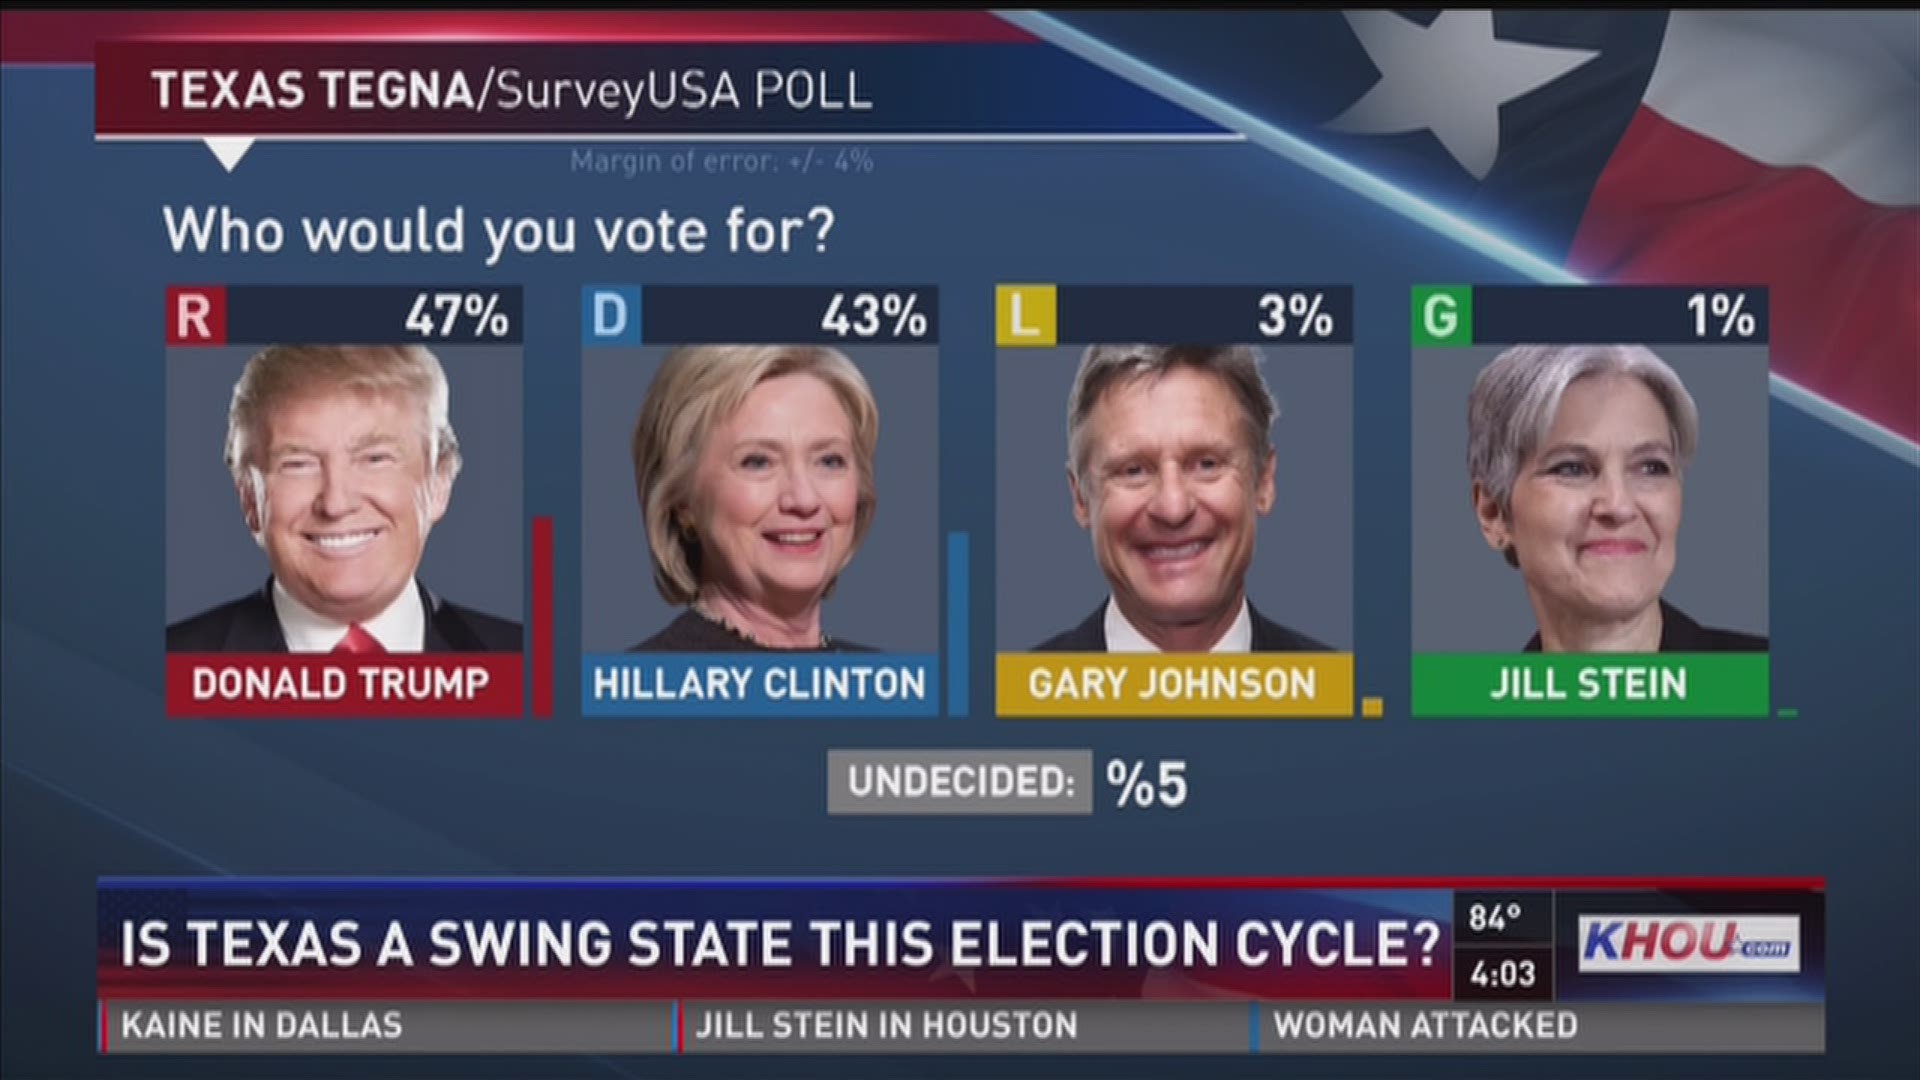 Data from a new poll suggests that Texas could be a swing state in this election cycle.